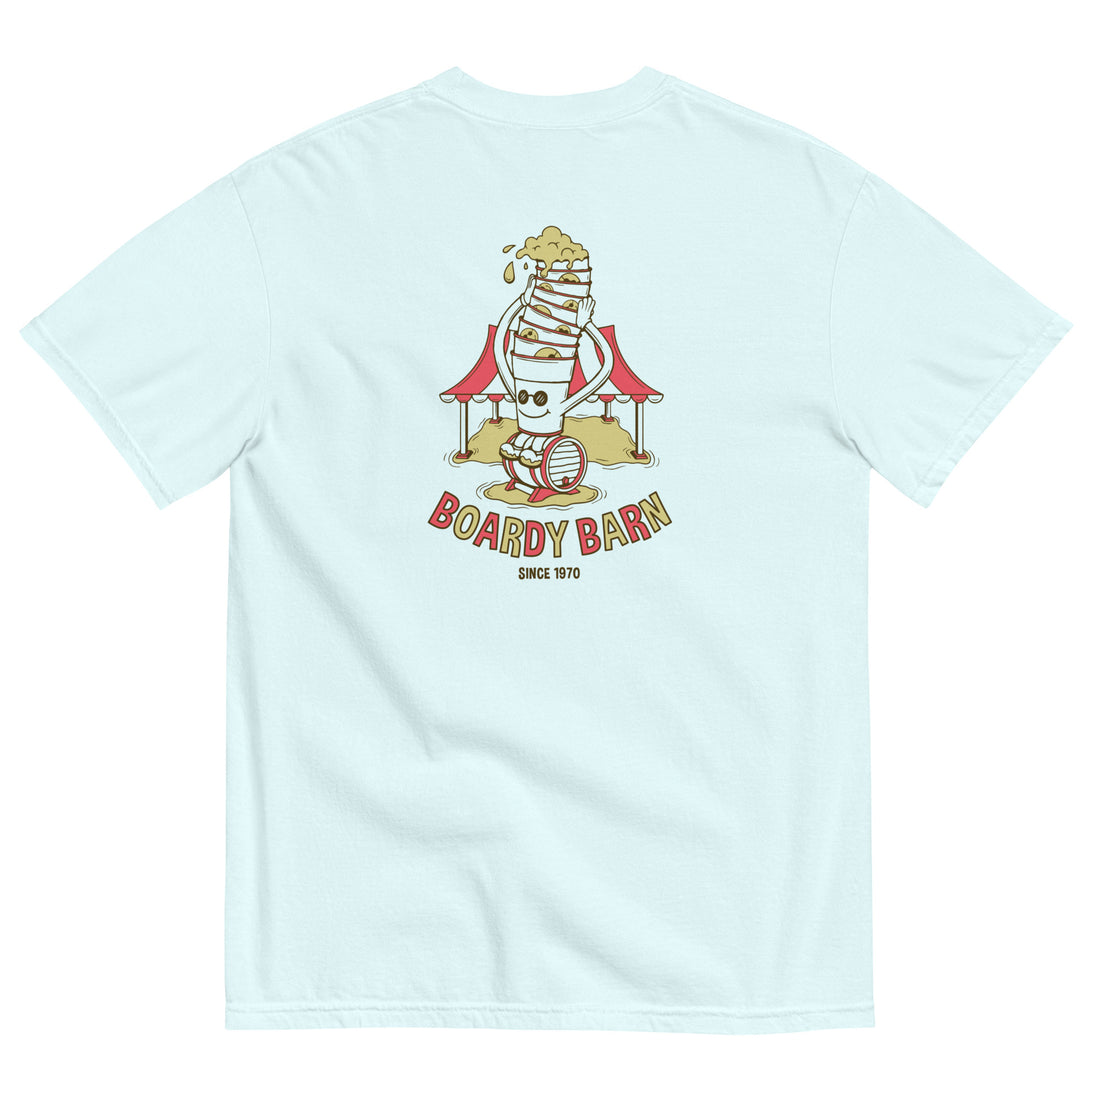 
  
  Boardy Barn Cup Stack - Unisex garment-dyed heavyweight t-shirt
  
